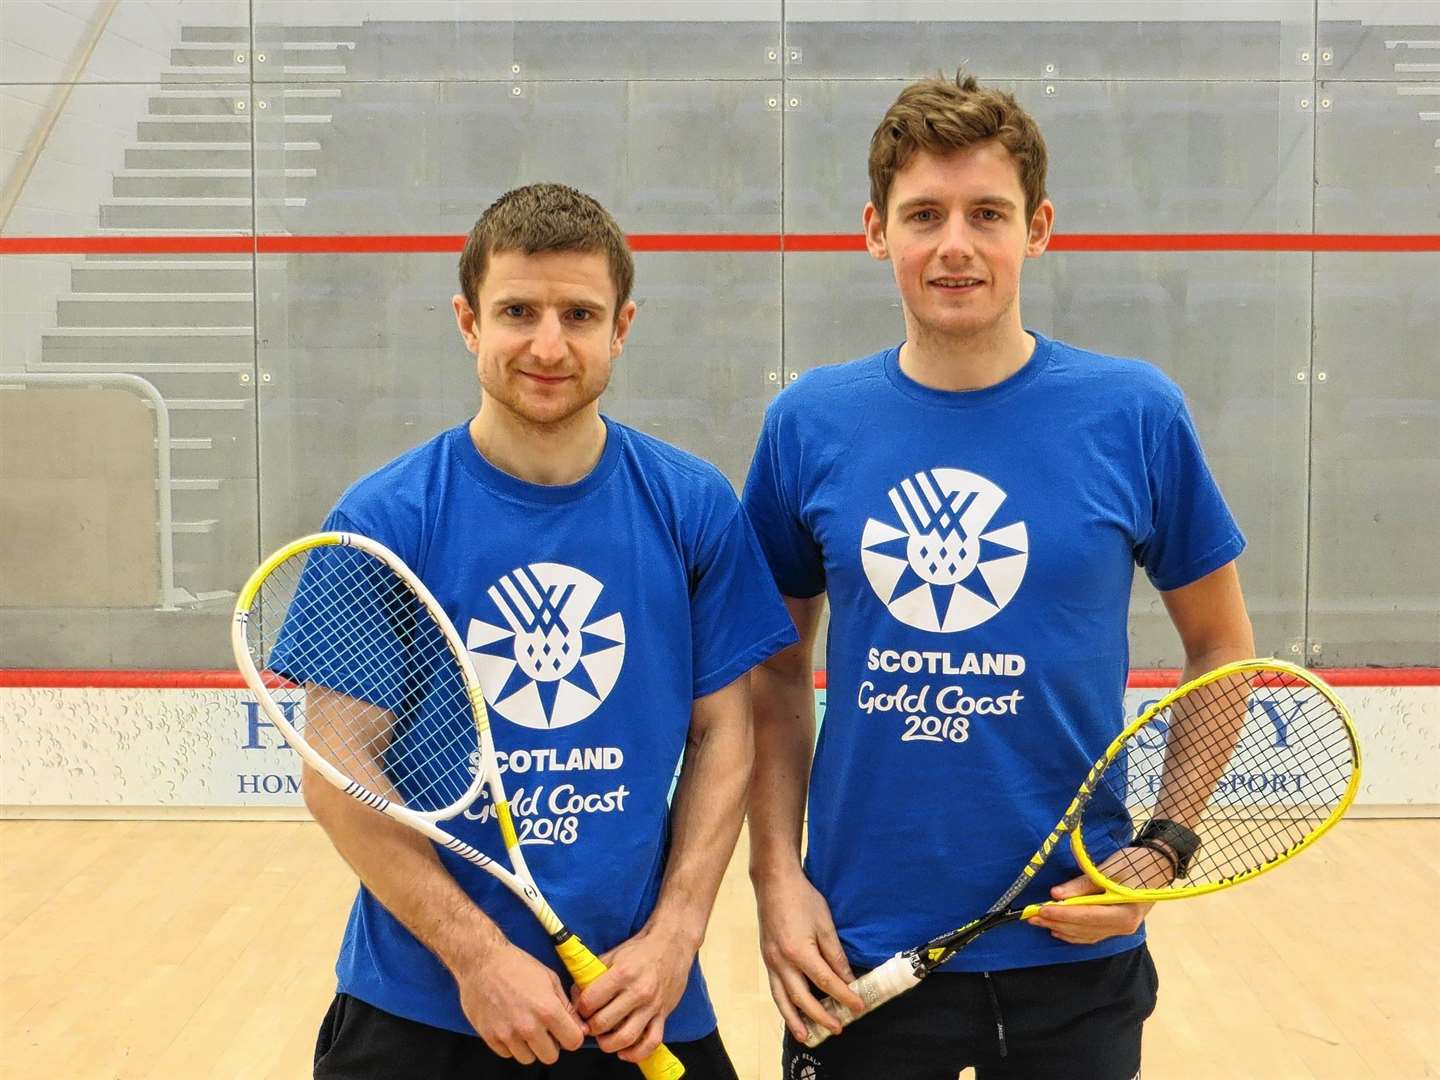 Fellow Inverness Tennis and Squash Club alumni Alan Clyne and Greg Lobban will once again team up alongside Prott in the Scotland squad.